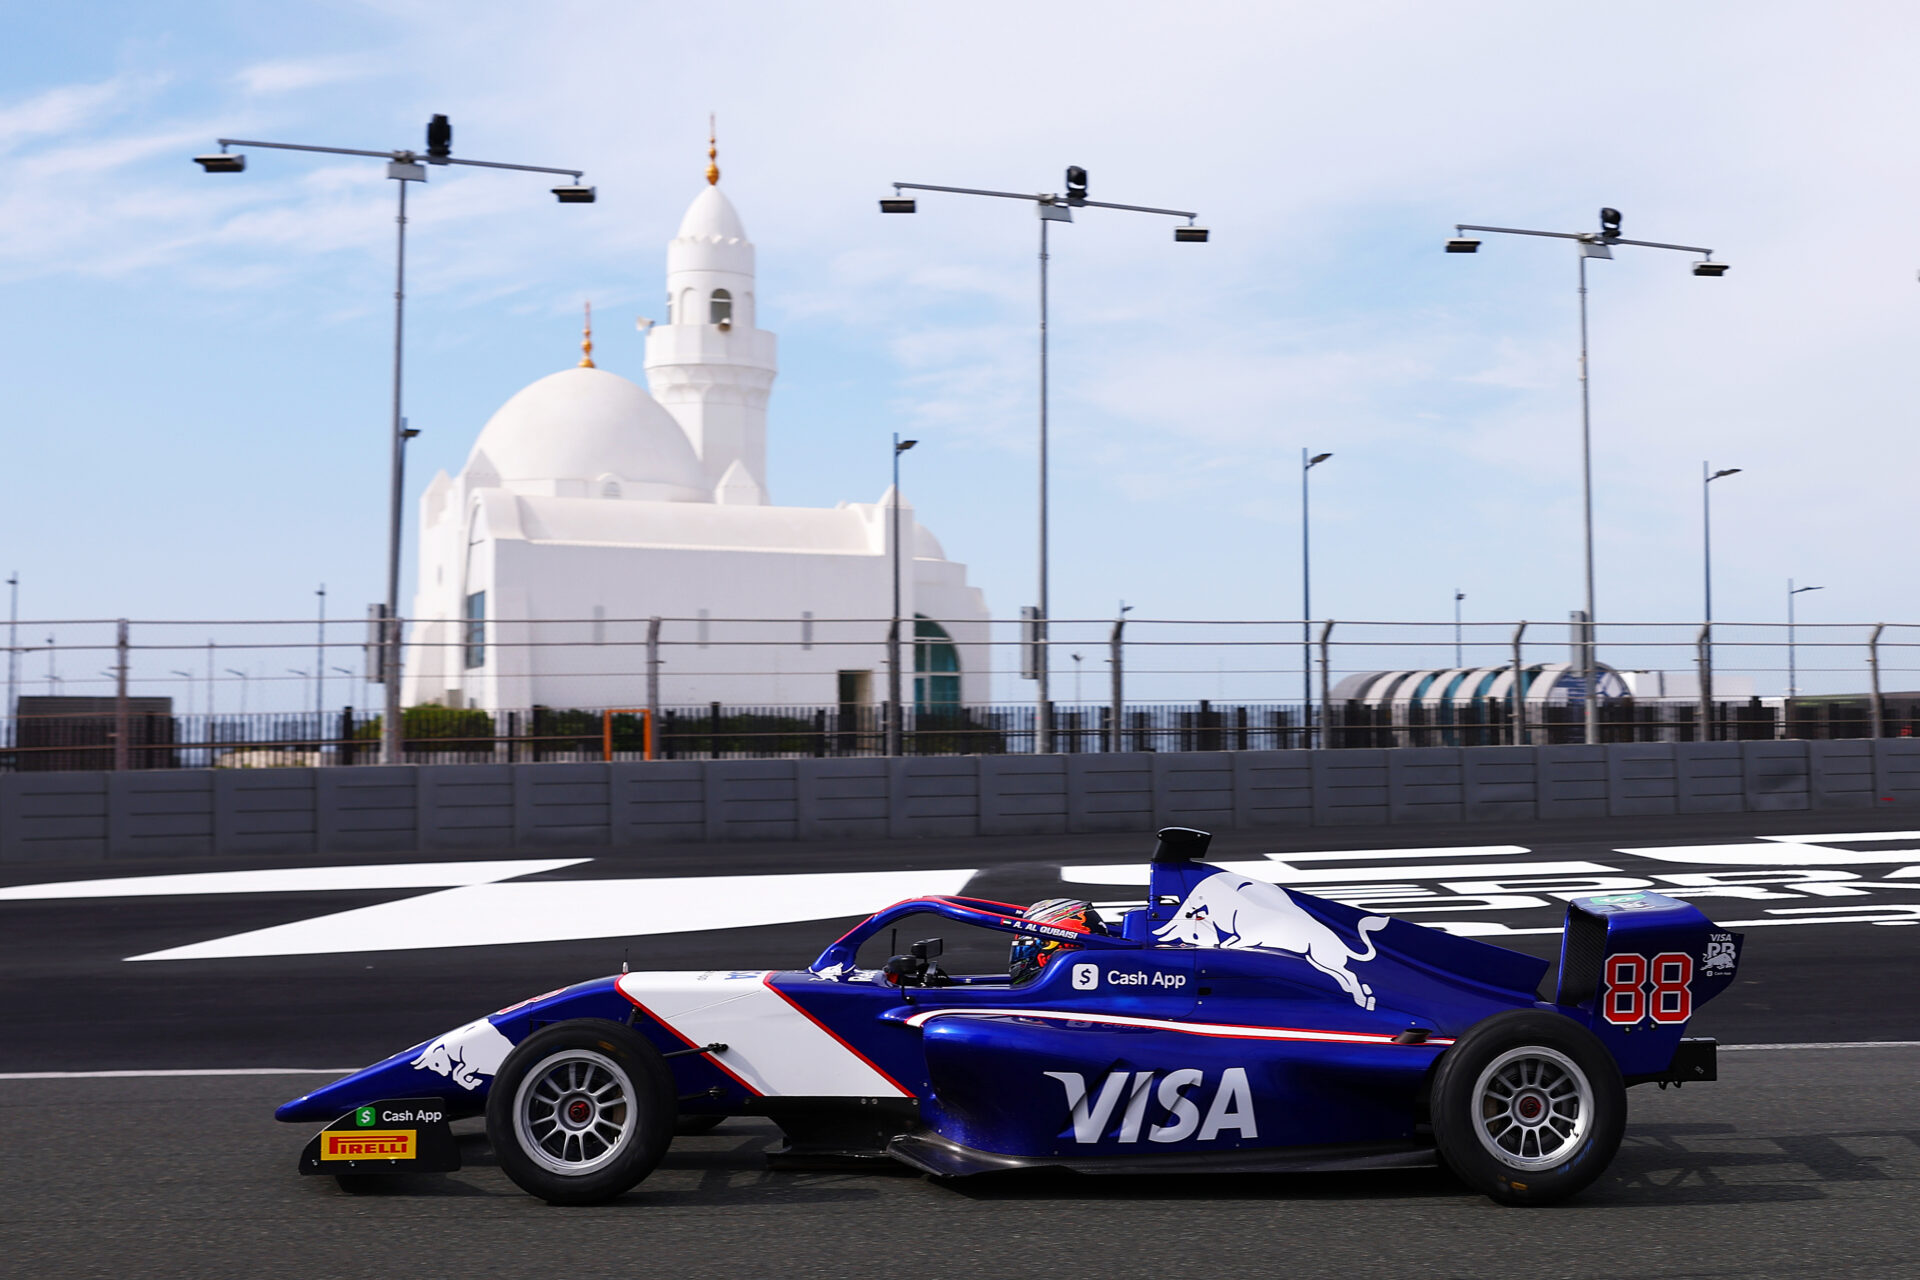 Amna Al Qubaisi drives at the Jeddah Corniche Circuit during F1 Academy testing in Saudi Arabia. (Getty Images)